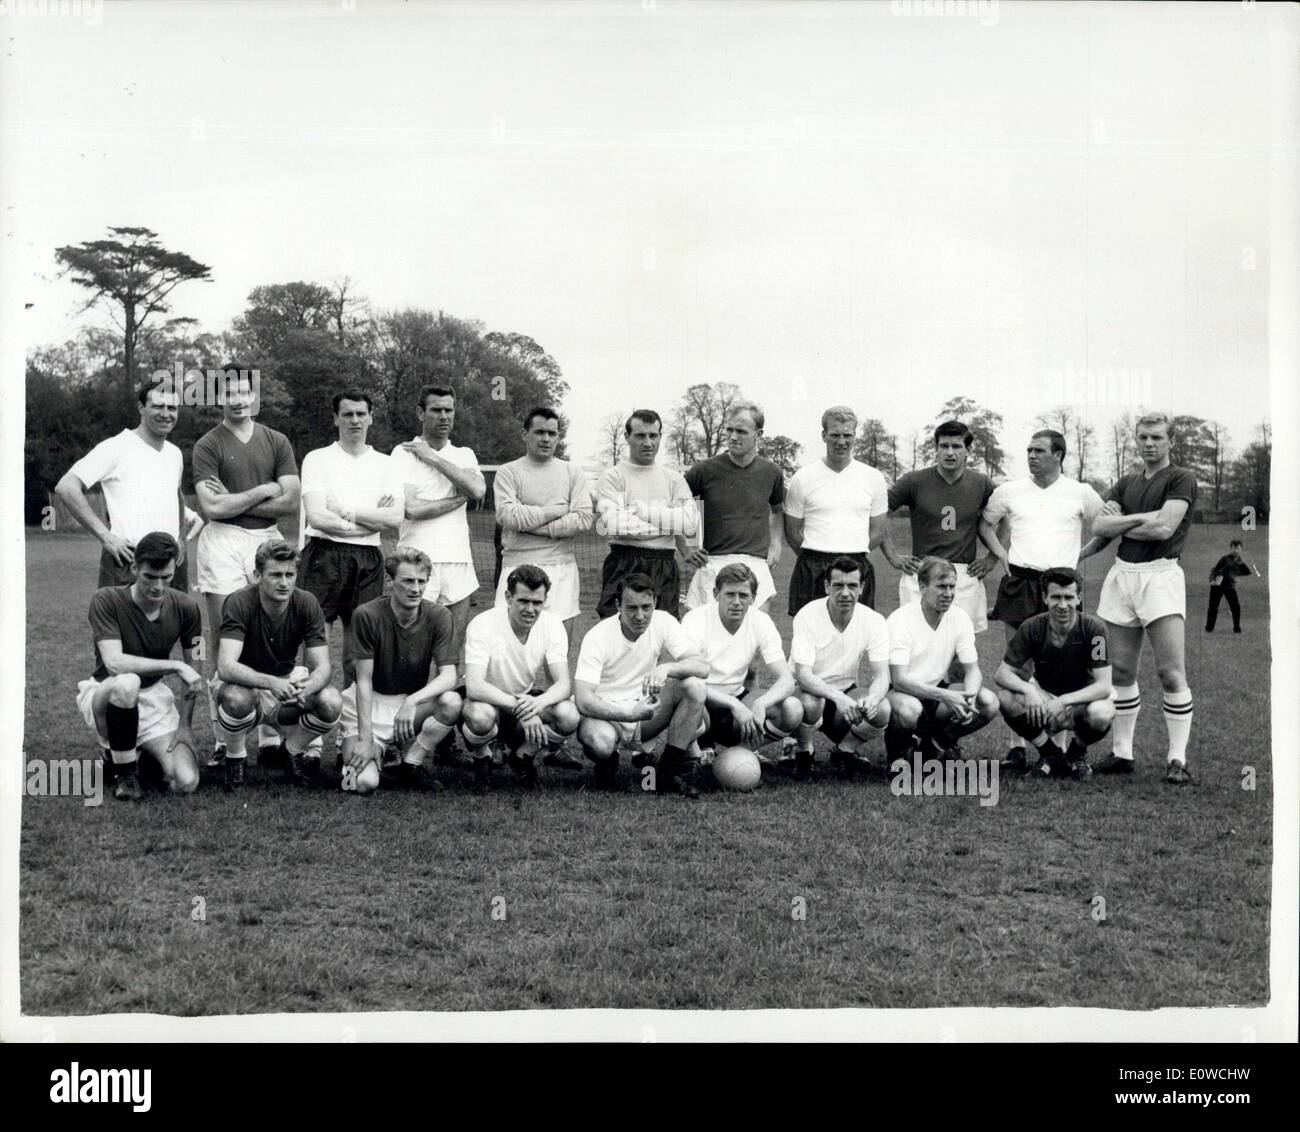 May 08, 1962 - 1,000,000- worth of Football Talent: Members of the England team which will play this year were training at Roehampton yesterday. Picture Shows: The Team from Left to Right: Back Row: Armfield, Blackpool; Norman, Spurs; Robson, West Bromwich; Swan, Sheffield Wednesday; Hongkinson, shield United; Springgett, Sheffield Wednesday; Howe, Wet Brownwich ; flowers; Wolves; Anderson, Sunderland; Wilson, Huddersfiled; and Moore, West Ham -Front Row: Peacock, Middles borough; Hunt, Liverpool; Esstham, Arsenal; Connelly, Burnley; Greaves, Spurs; Hitghe, International Milab; Haynes, Stock Photo